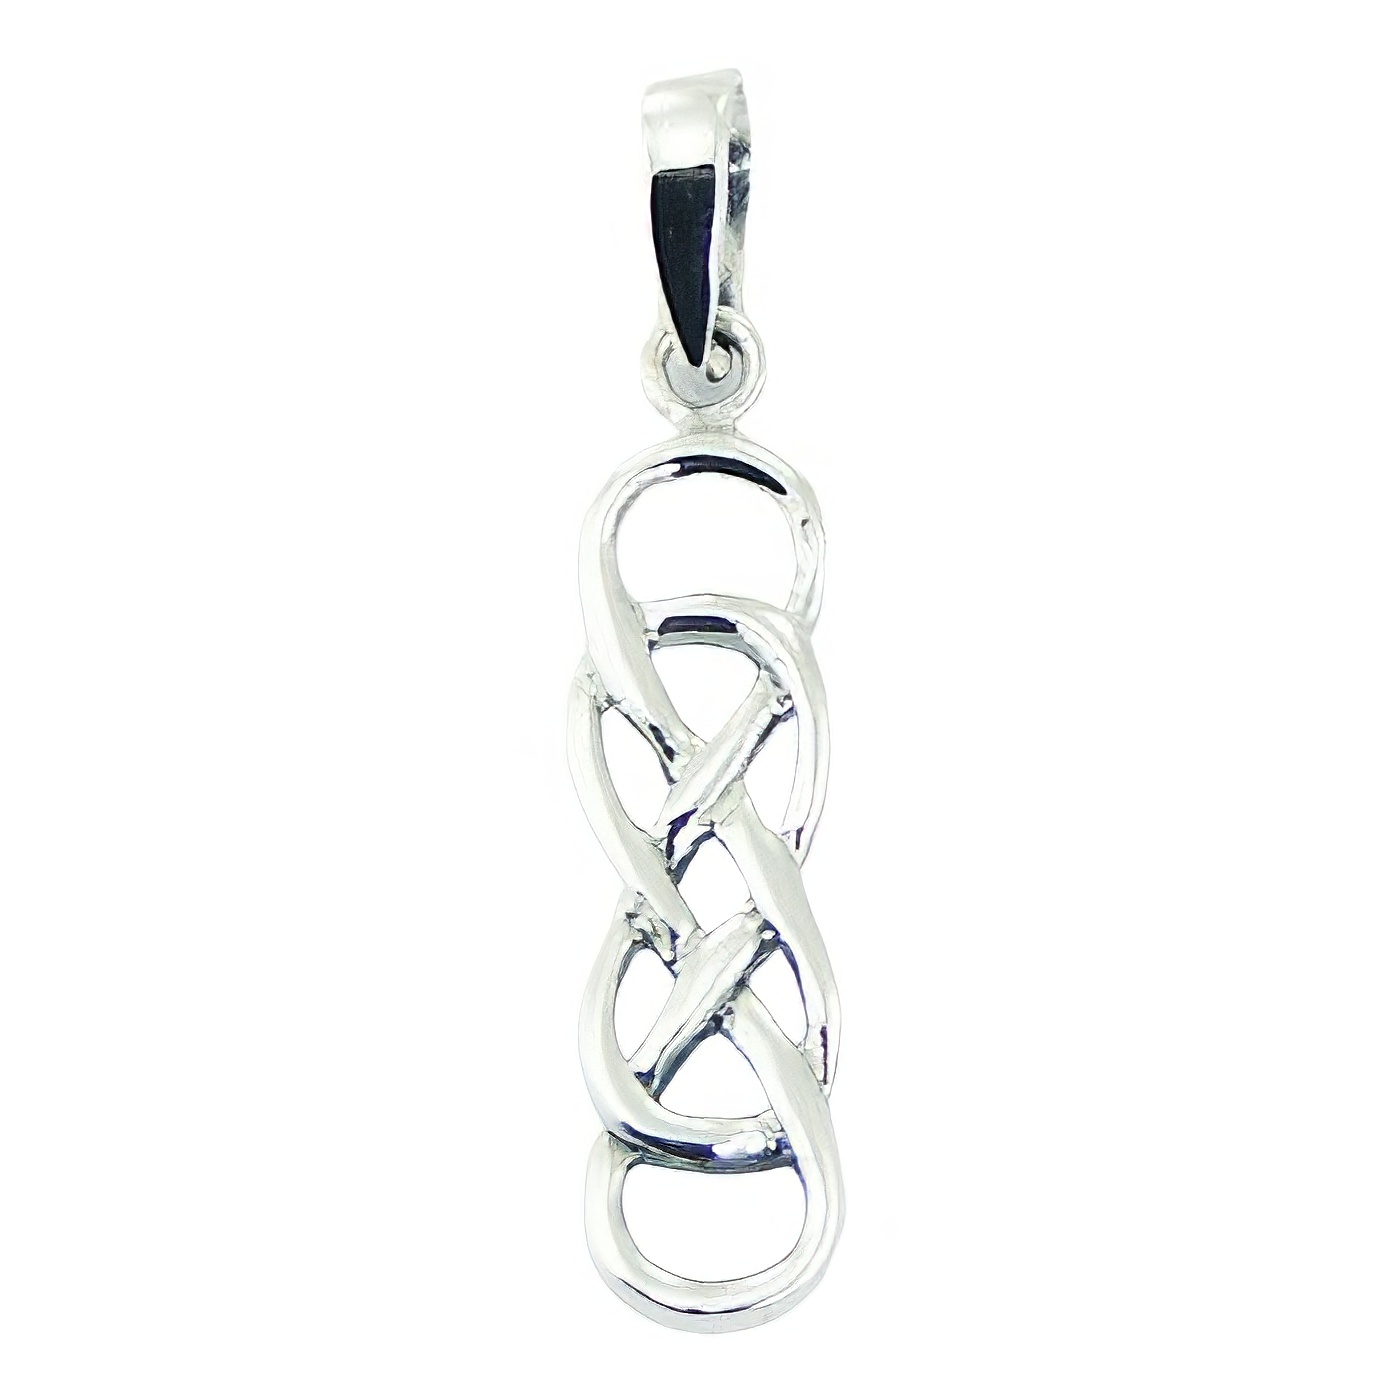 Entwined Sterling Silver Celtic Knot Pendant by BeYindi 